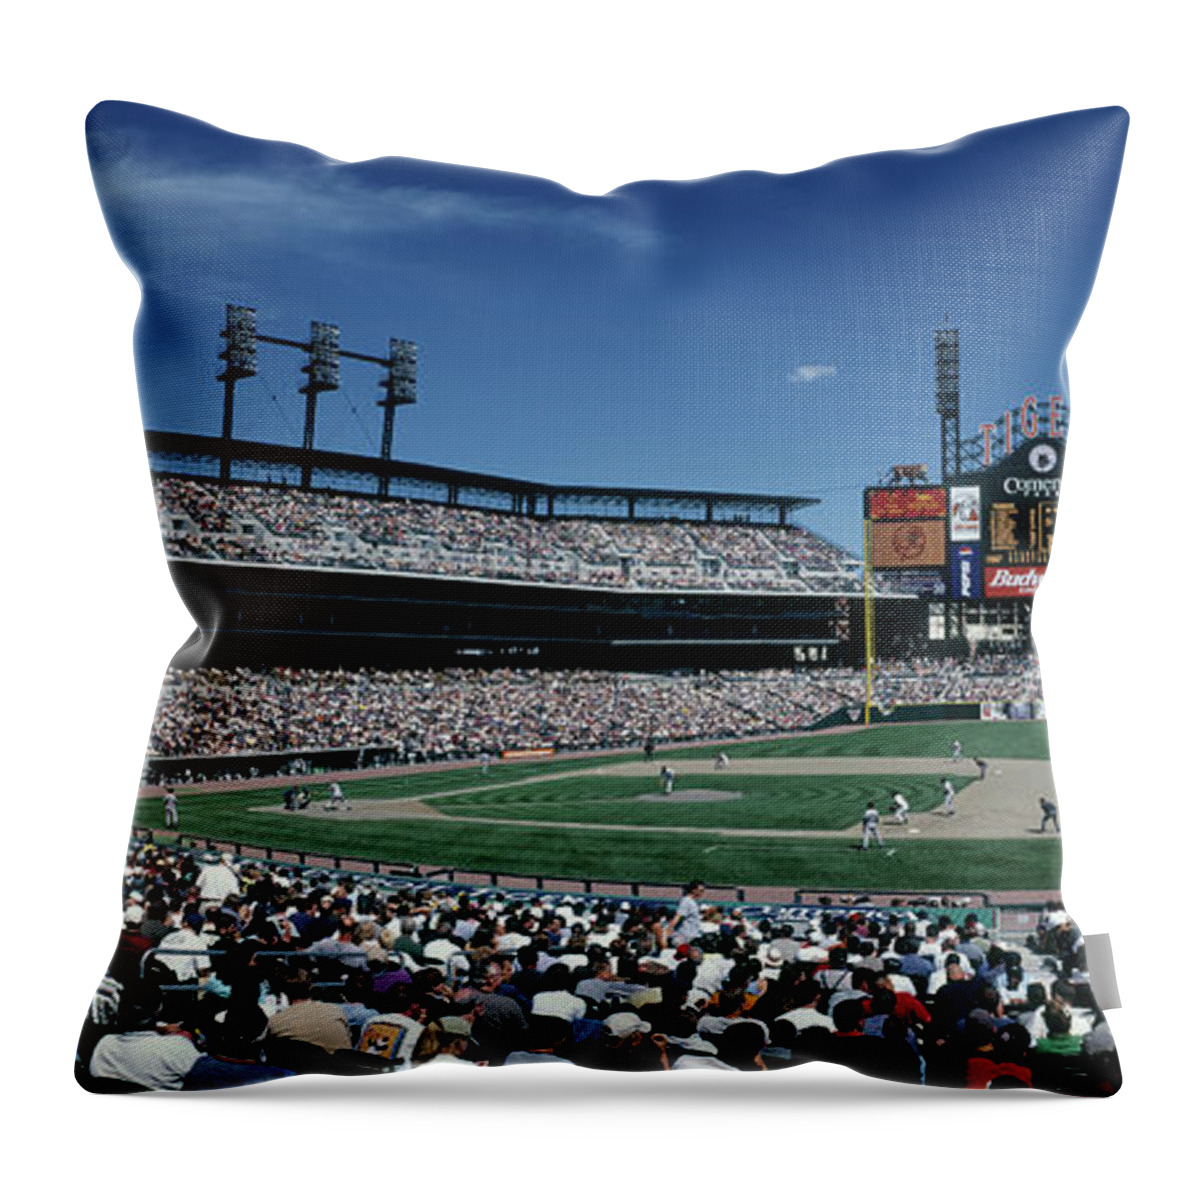 Photography Throw Pillow featuring the photograph People Watching Baseball Match by Panoramic Images